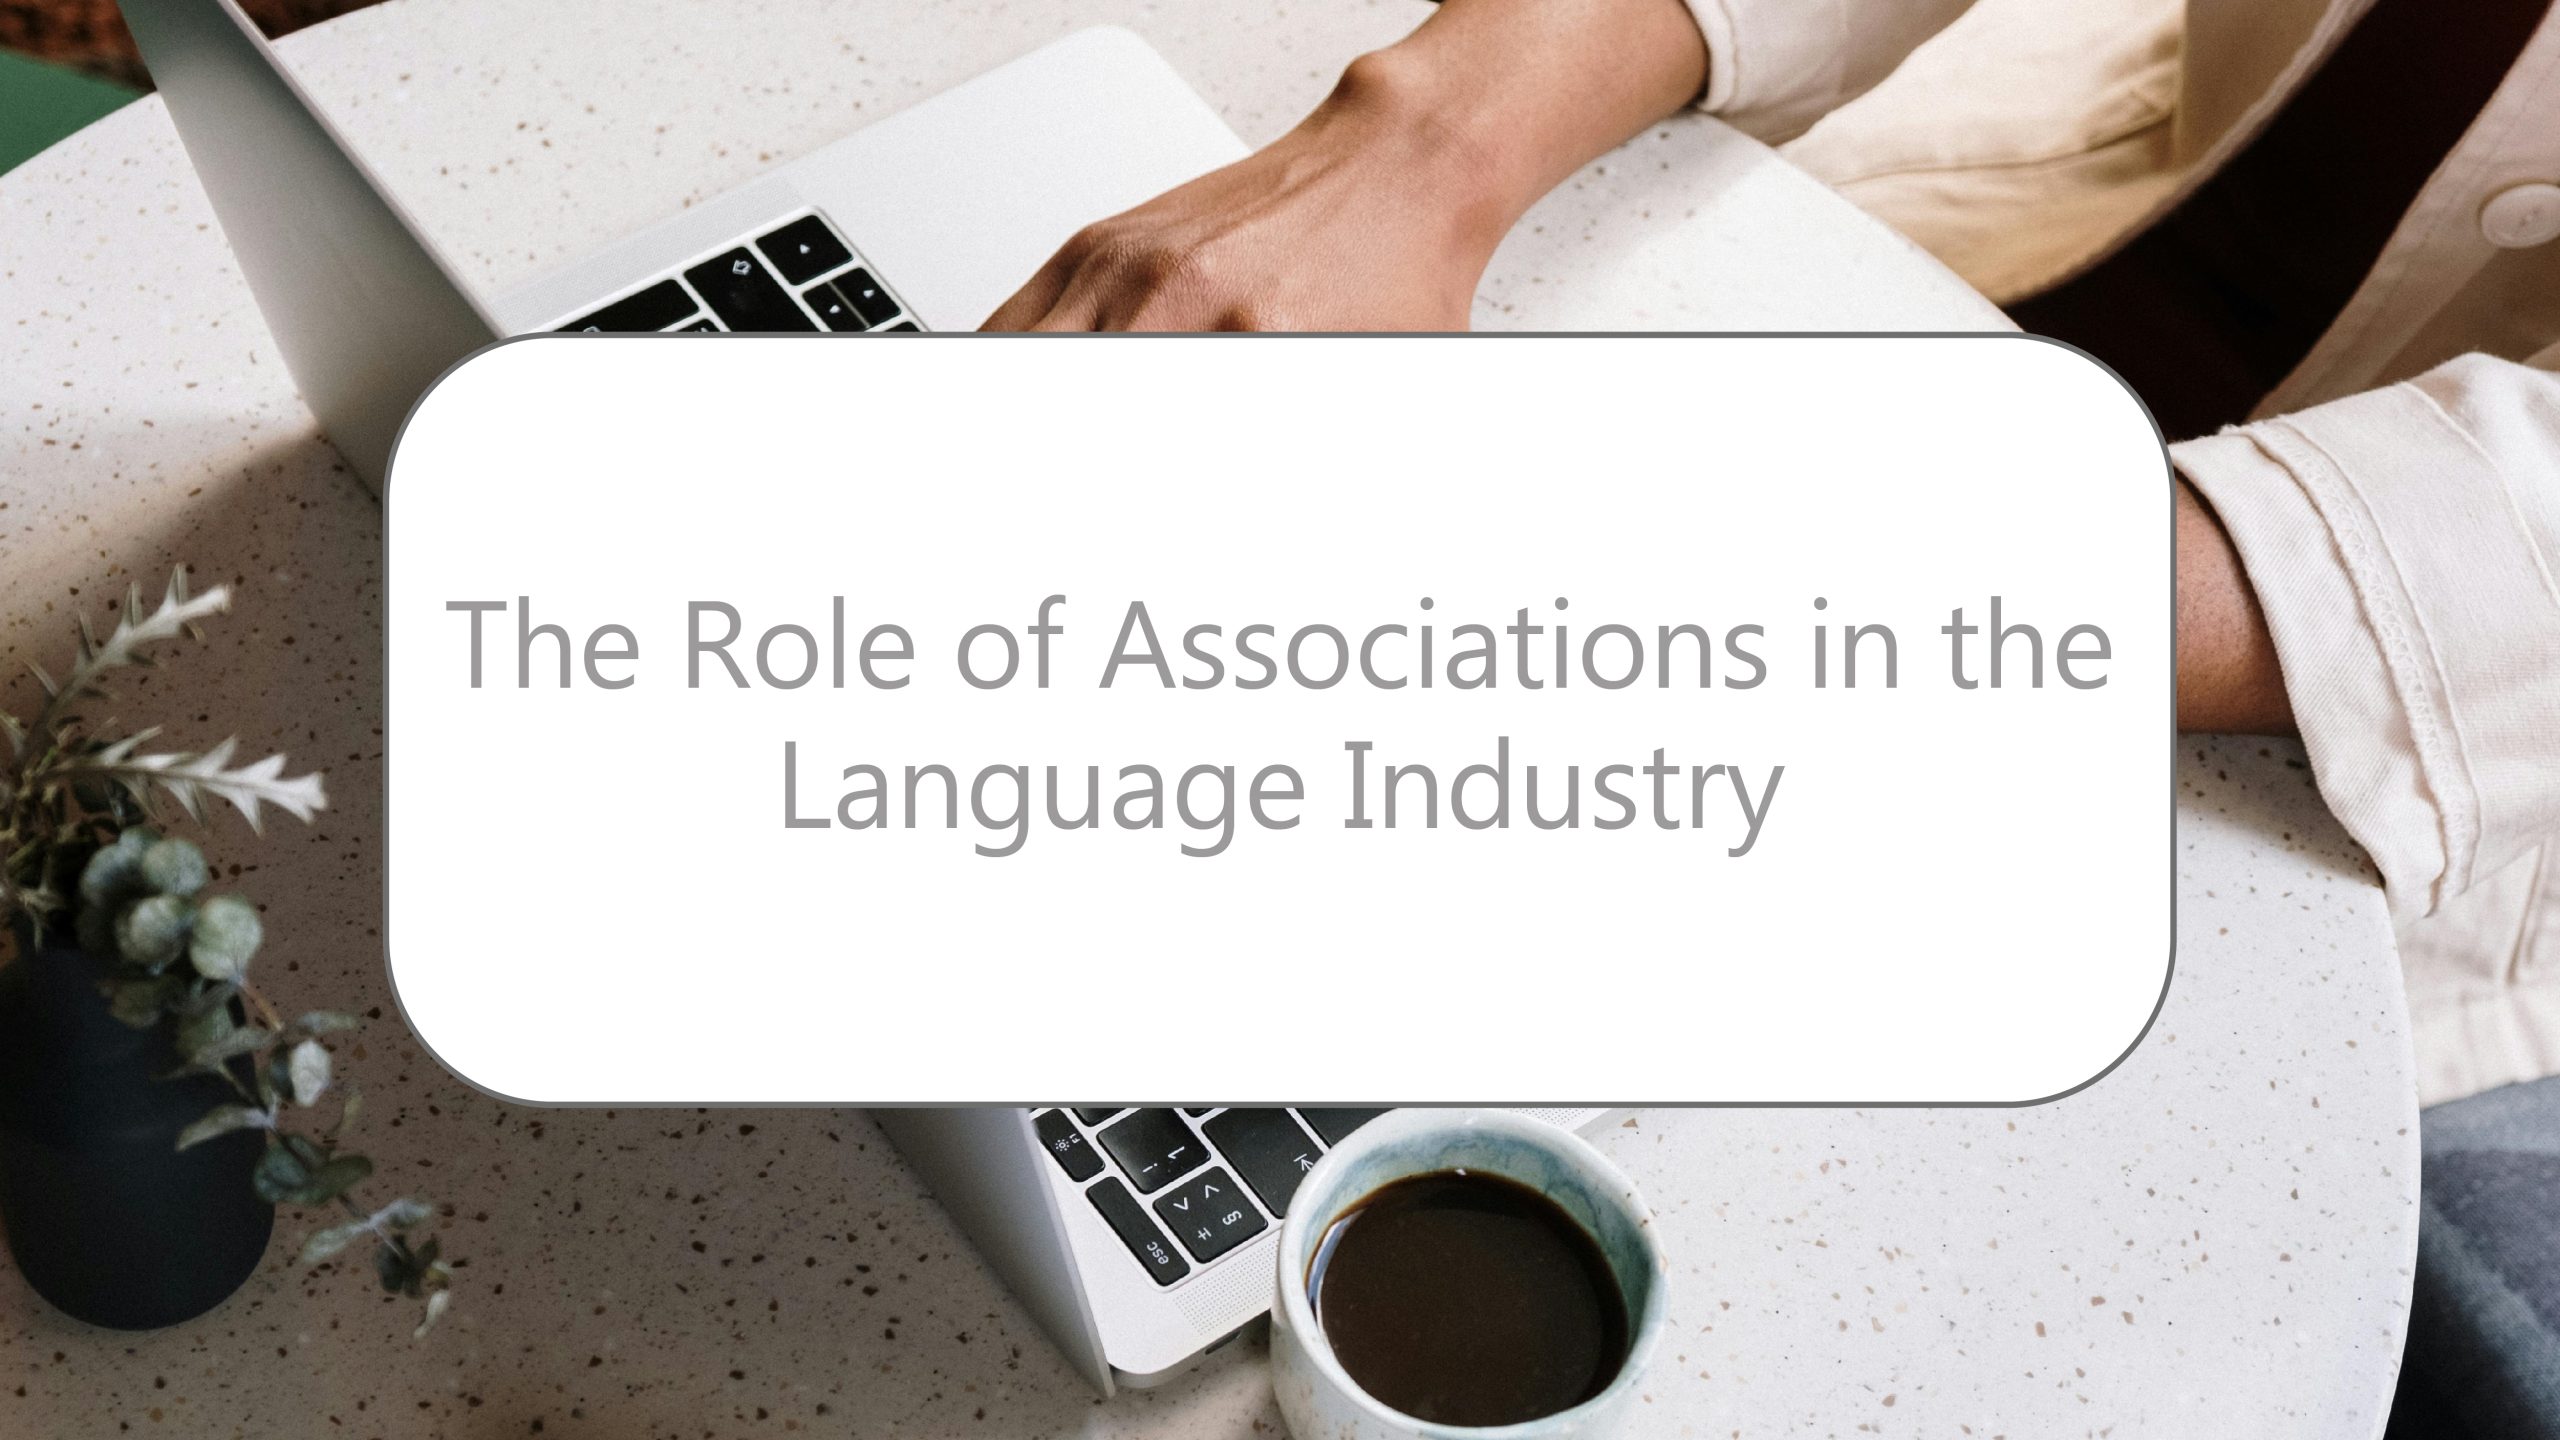 The Role of Associations in the Language Industry